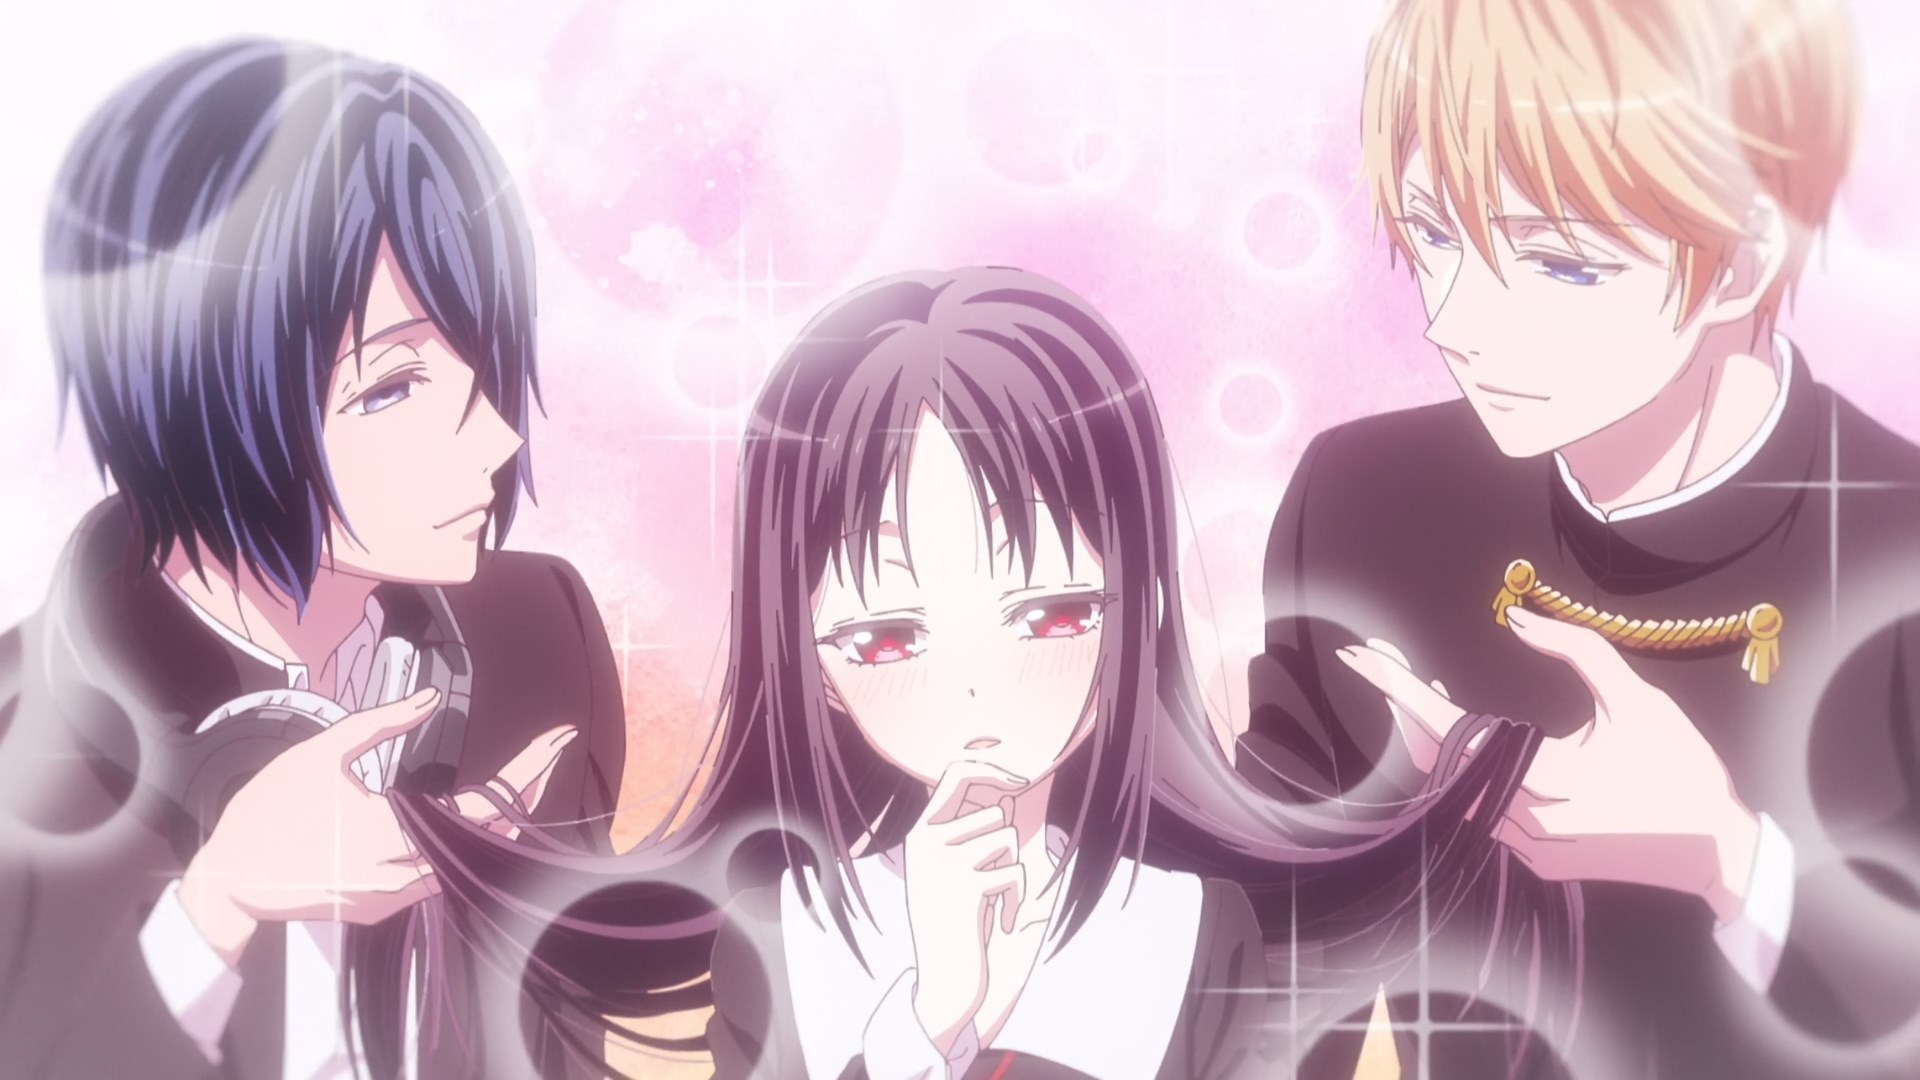 Kaguya-sama: Love is War -Ultra Romantic- Episode 5 Special ED Character  Designs and Production Materials by Animation Director, Vercreek : r/anime